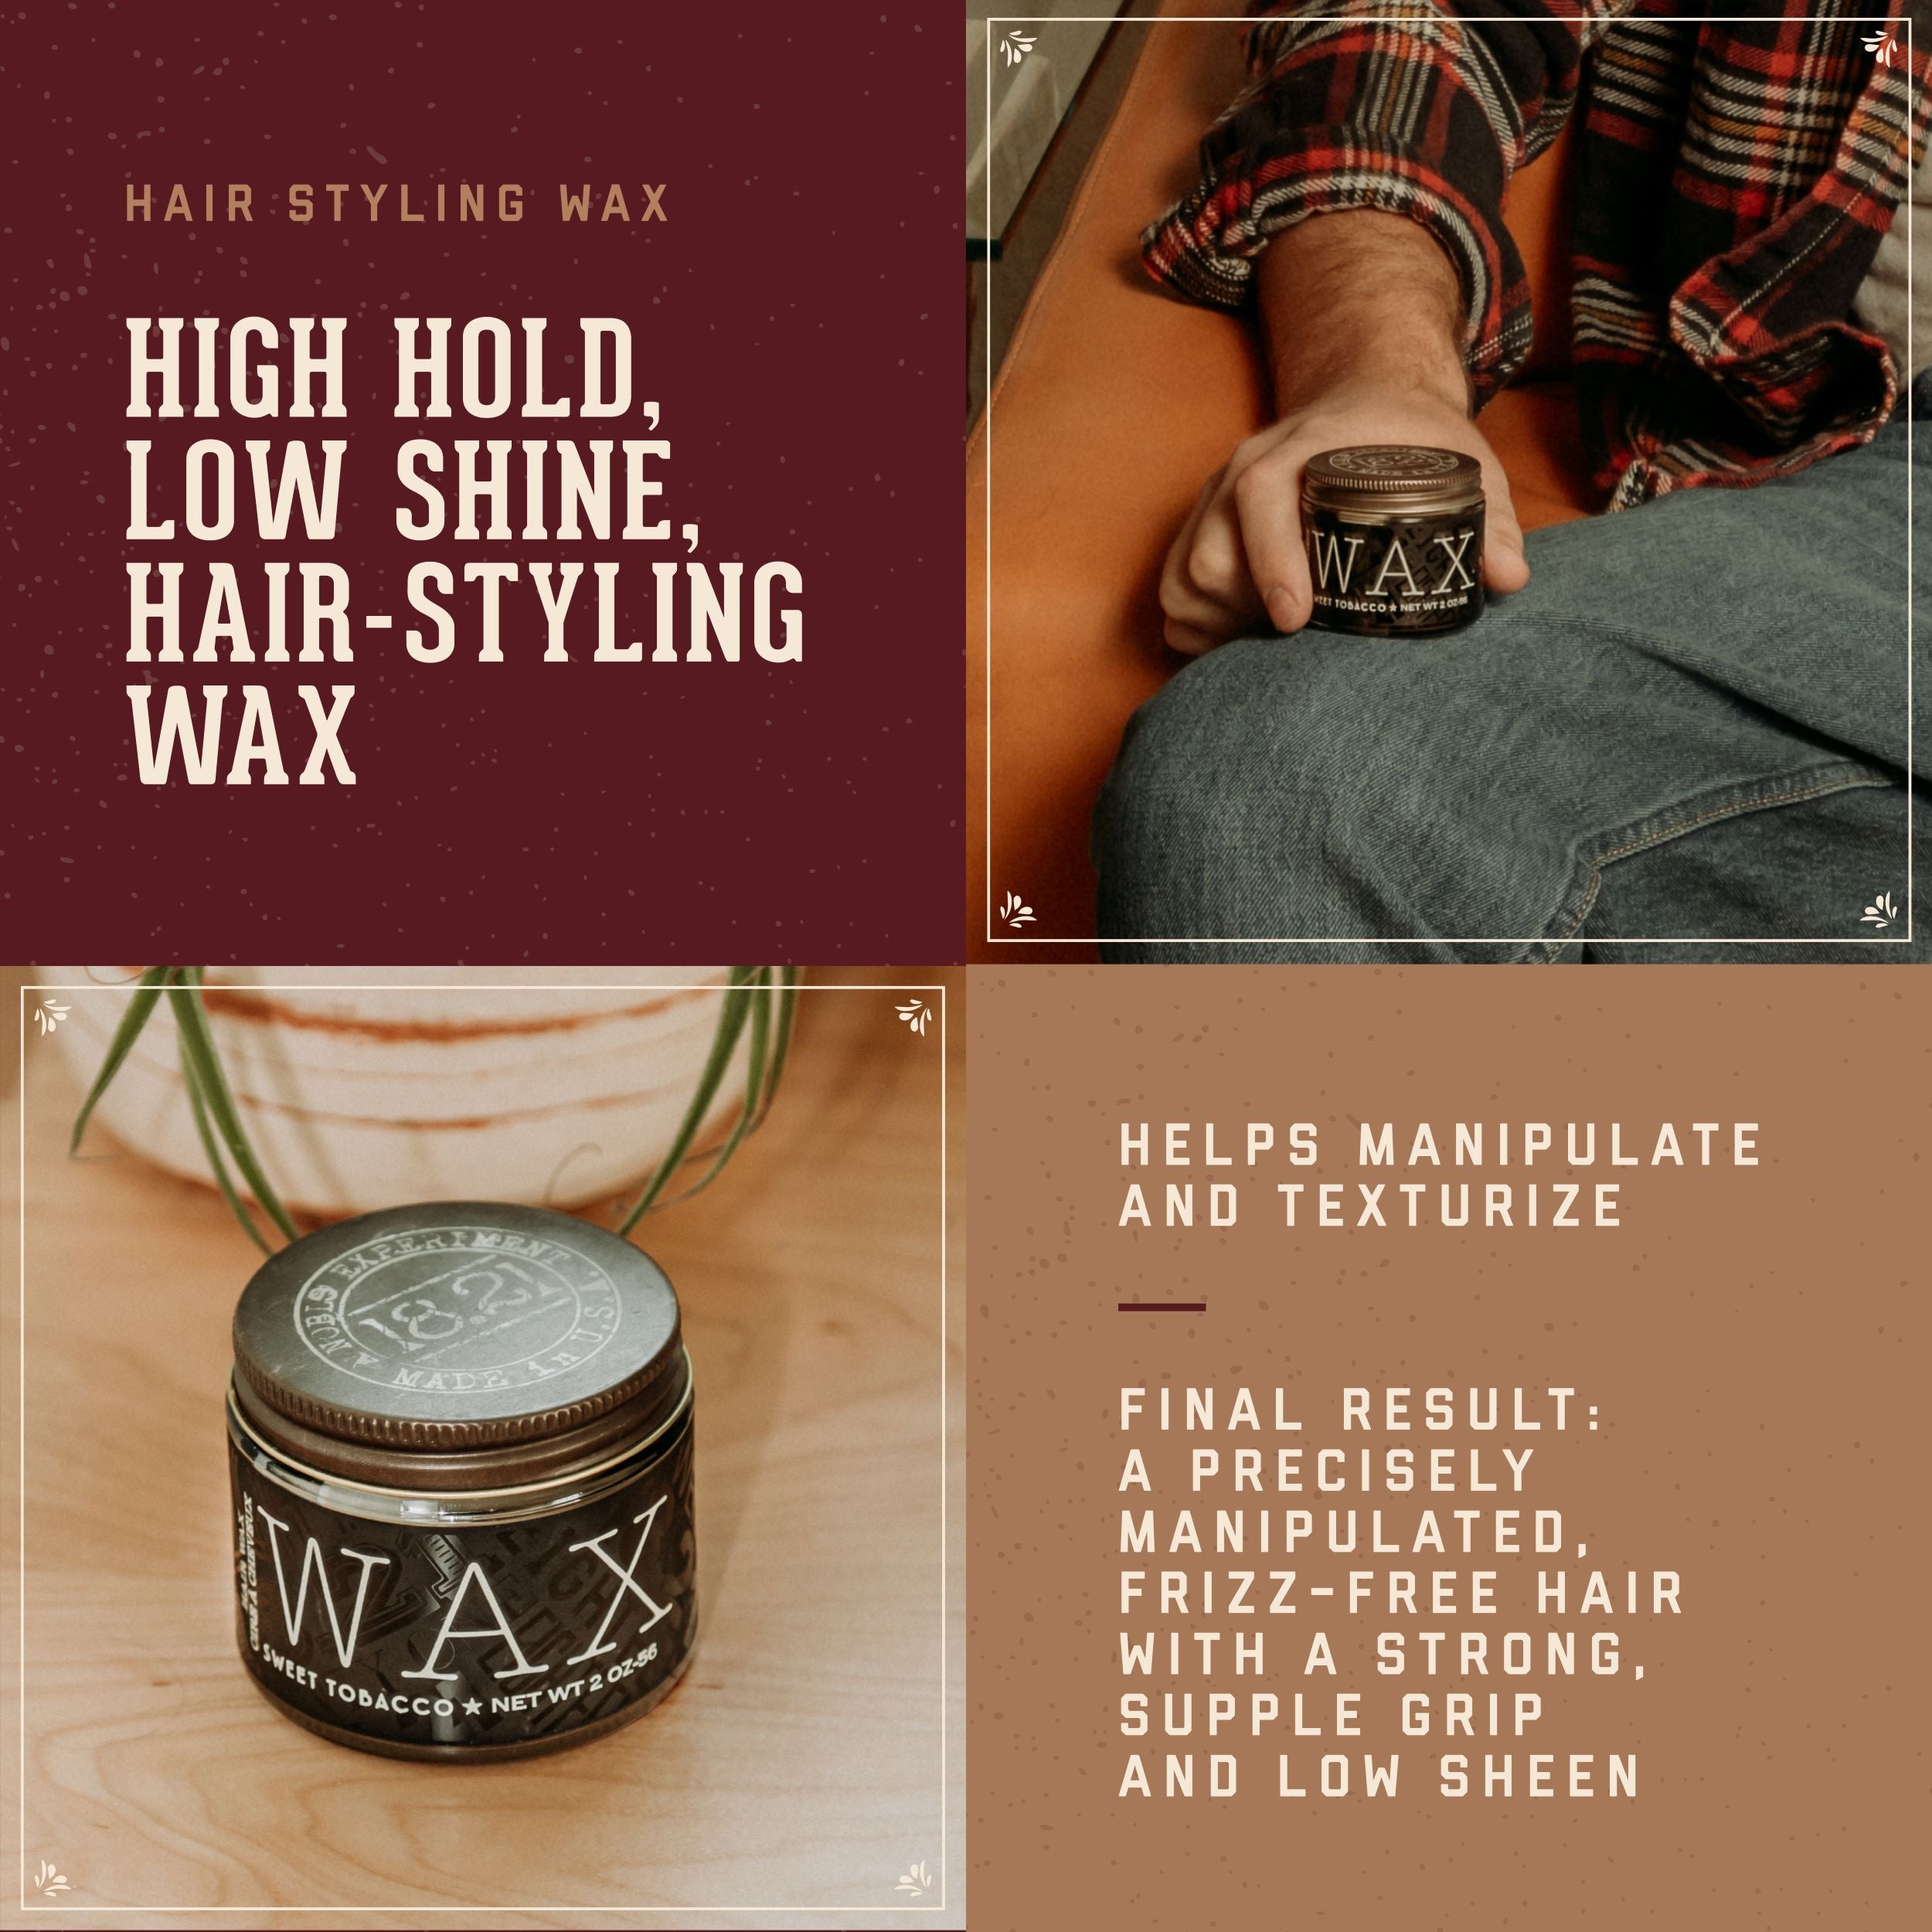 Hair Styling Wax Benefits.  High hold, low shine hair styling wax.  Helps manipulate and texturize. Final Result:  a precisely manipulated frizz-free hair with a strong, supple grip and low sheen